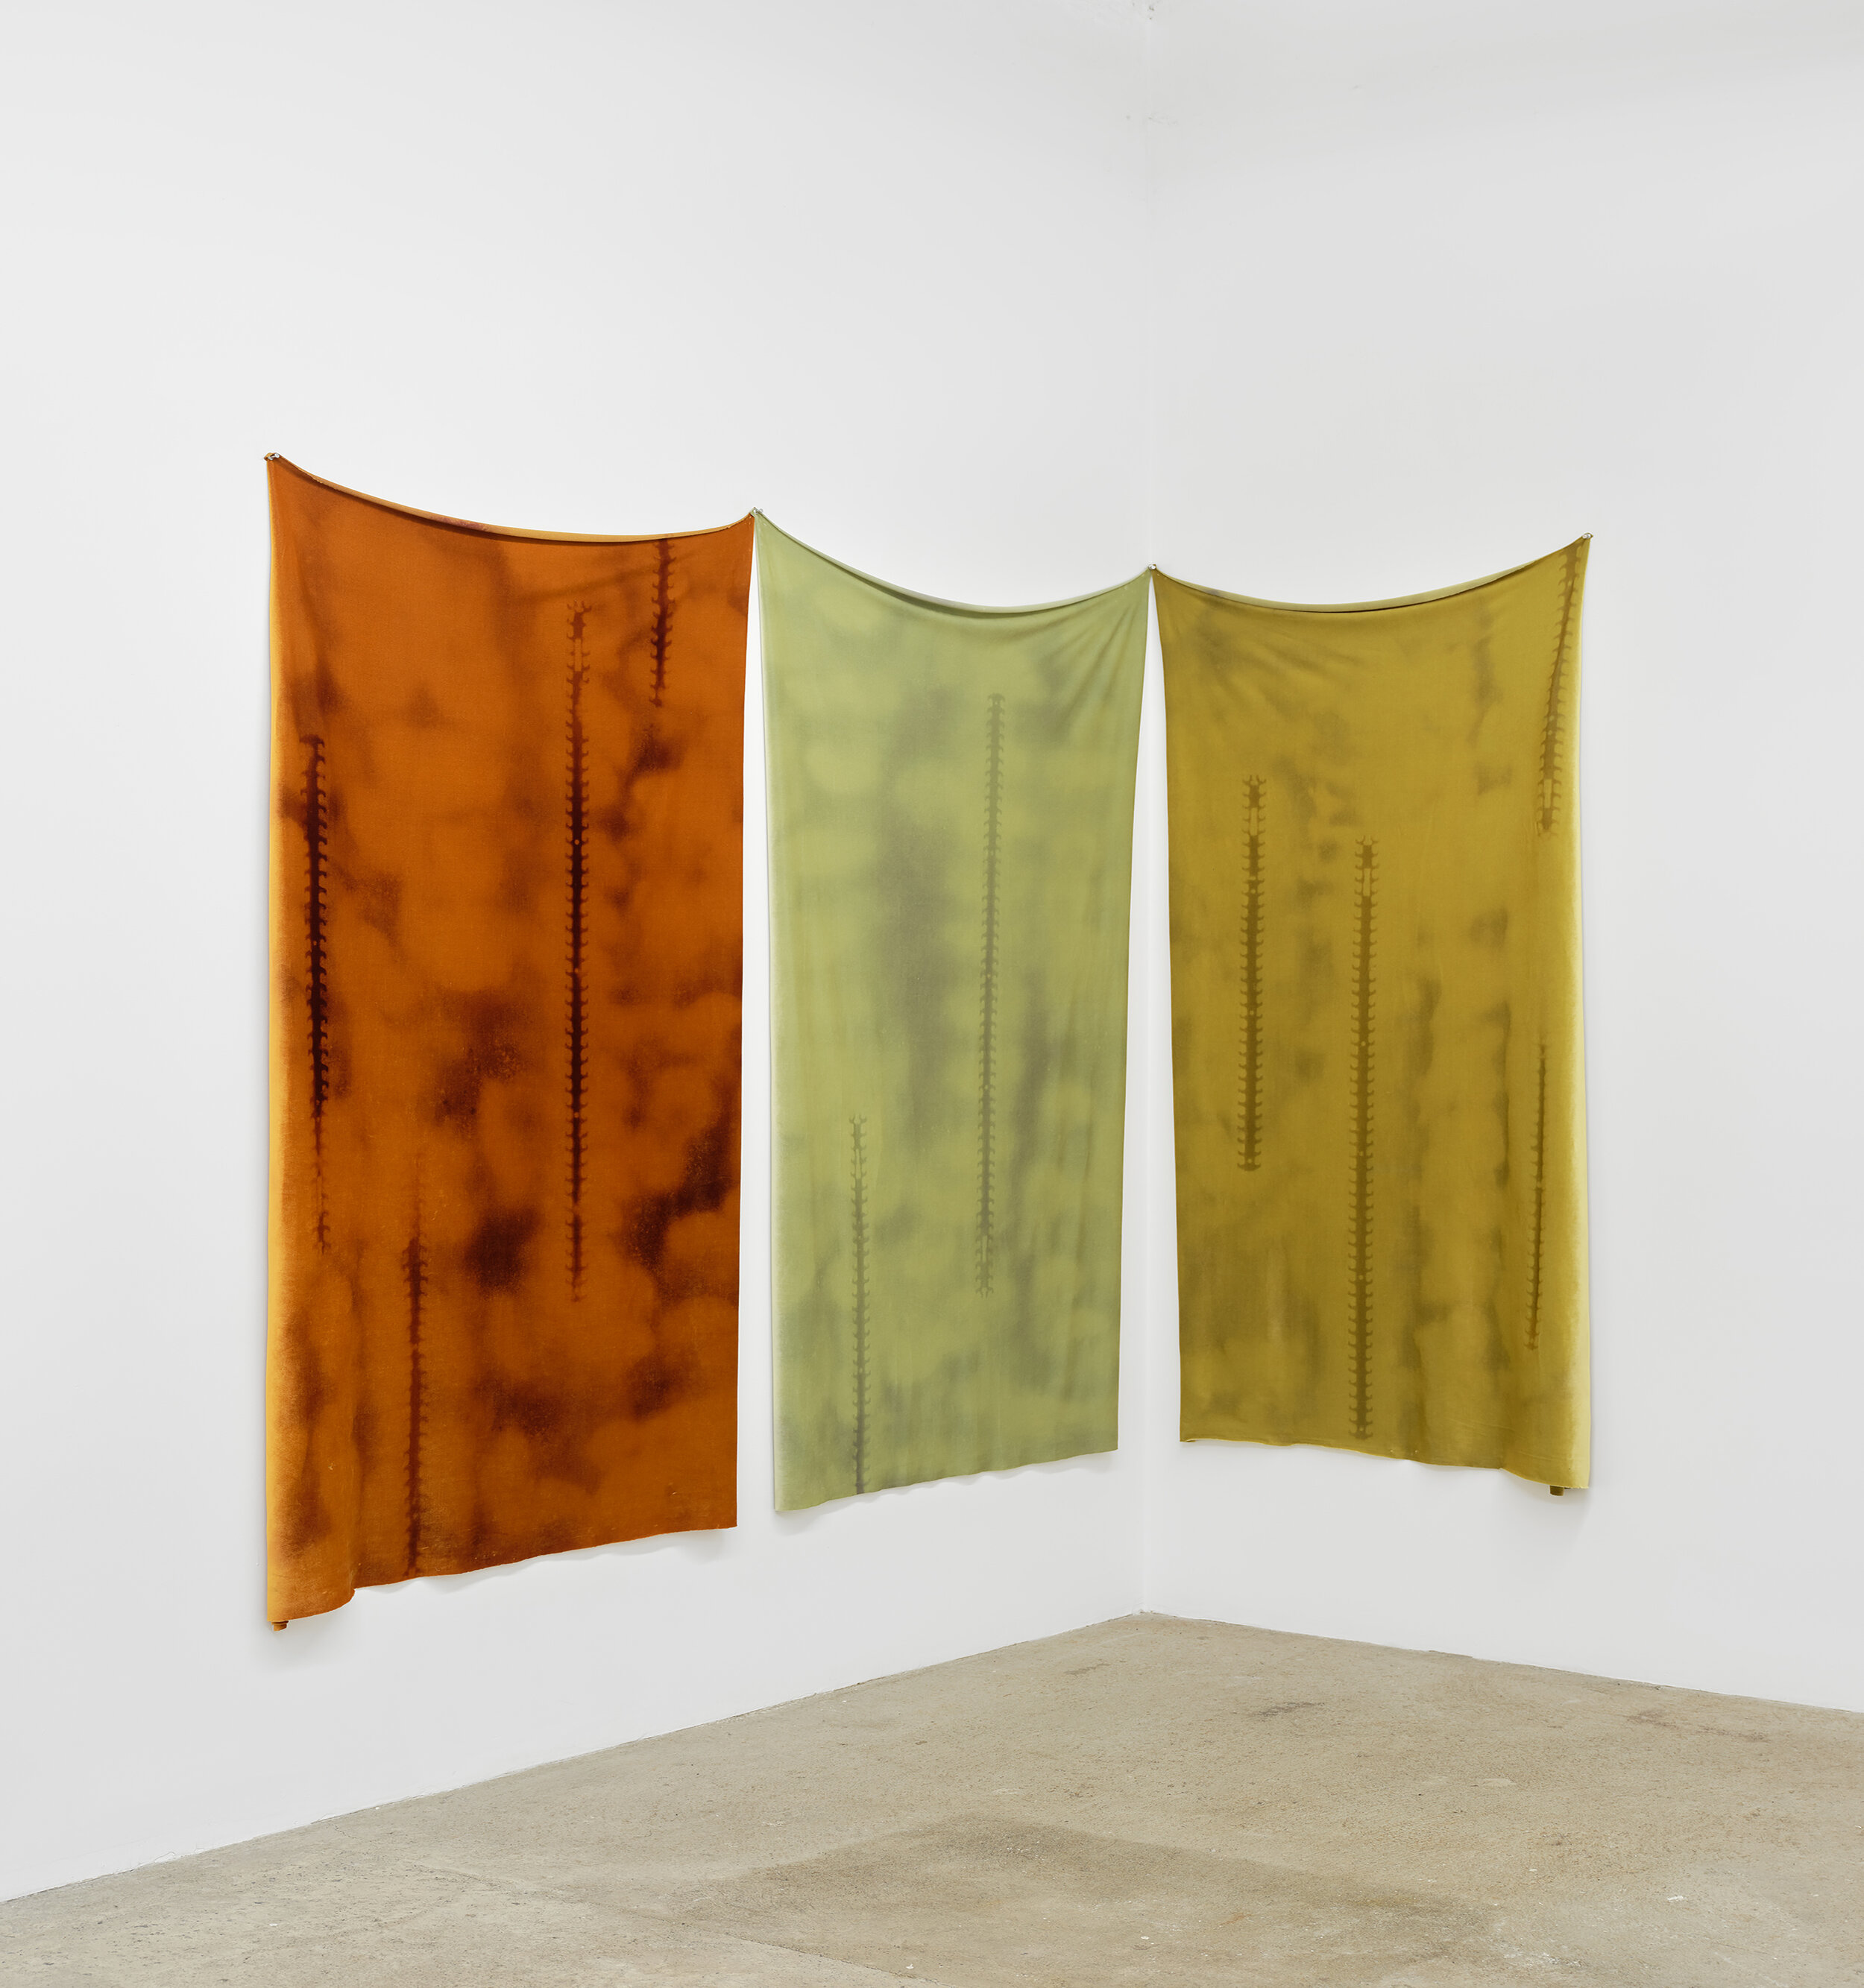  Vladislav Markov (left to right)  Burnout (with where my car is at) , 2020   Burnout (4,12) , 2020  Burnout (ETA ten minutes) , 2020 chemical fiber etching on velour  approximately 68 x 44 inches (173 x 112 cm) each panel 